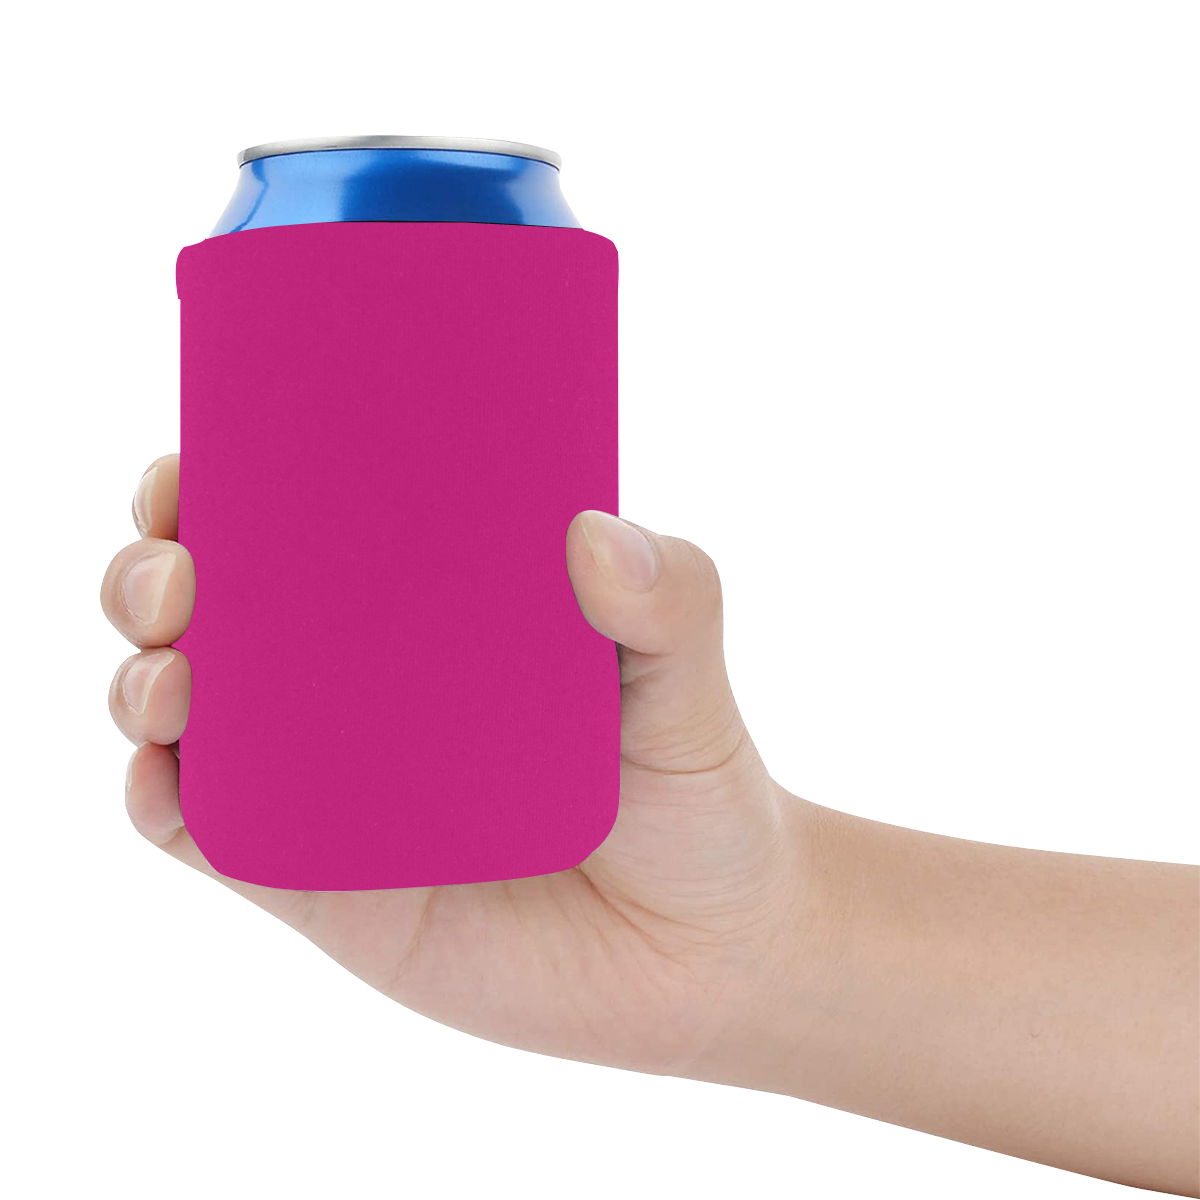 color Barbie pink Neoprene Can Cooler 4" x 2.7" dia.